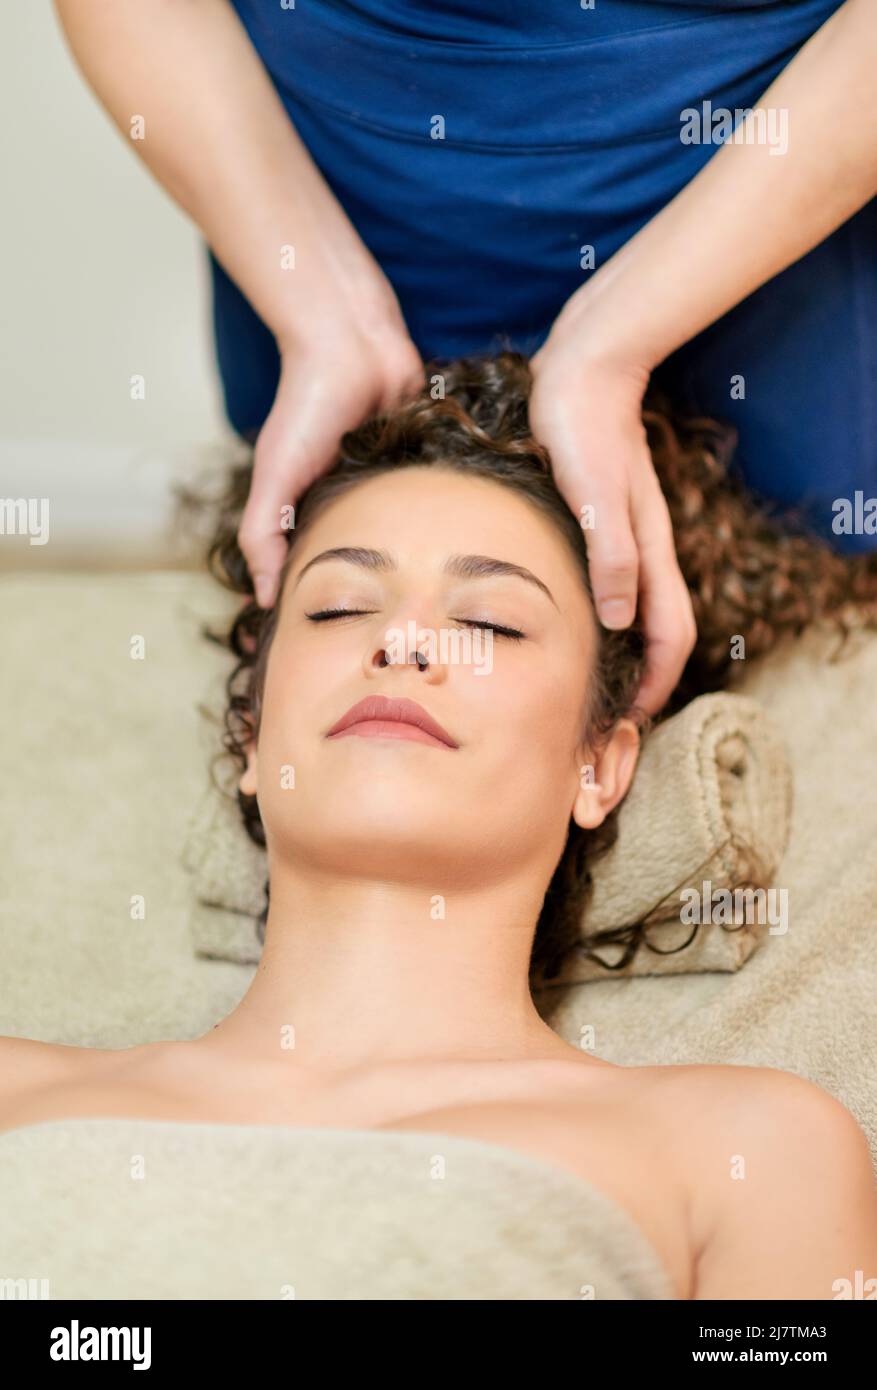 Crop Unrecognizable Masseur Doing Head Massage To Female Client With Curly Hair Lying On Towel